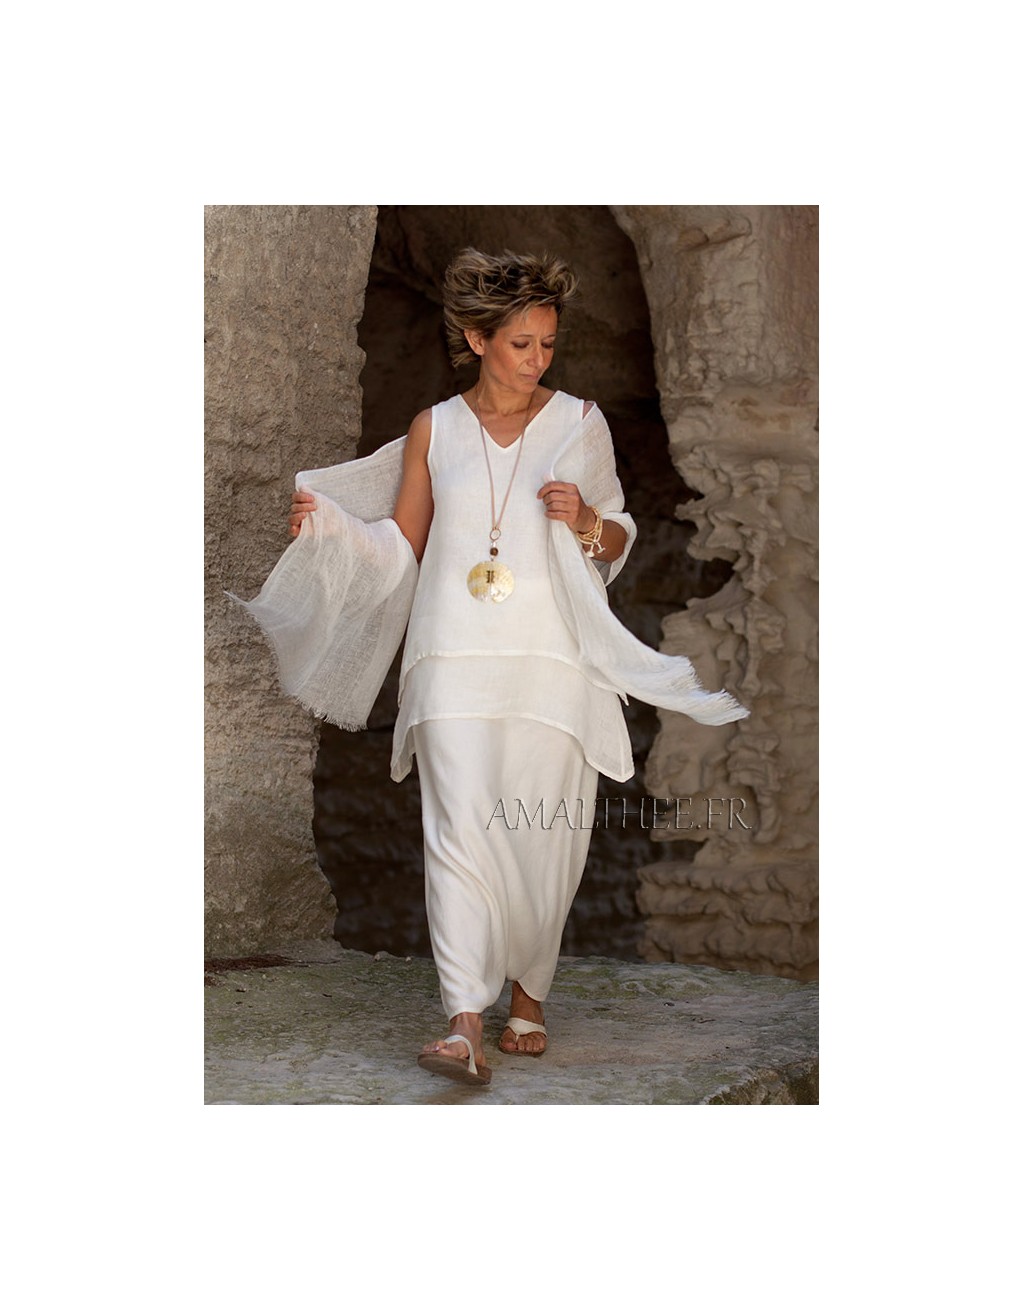 Off white layered linen gauze top with sarouel skirt